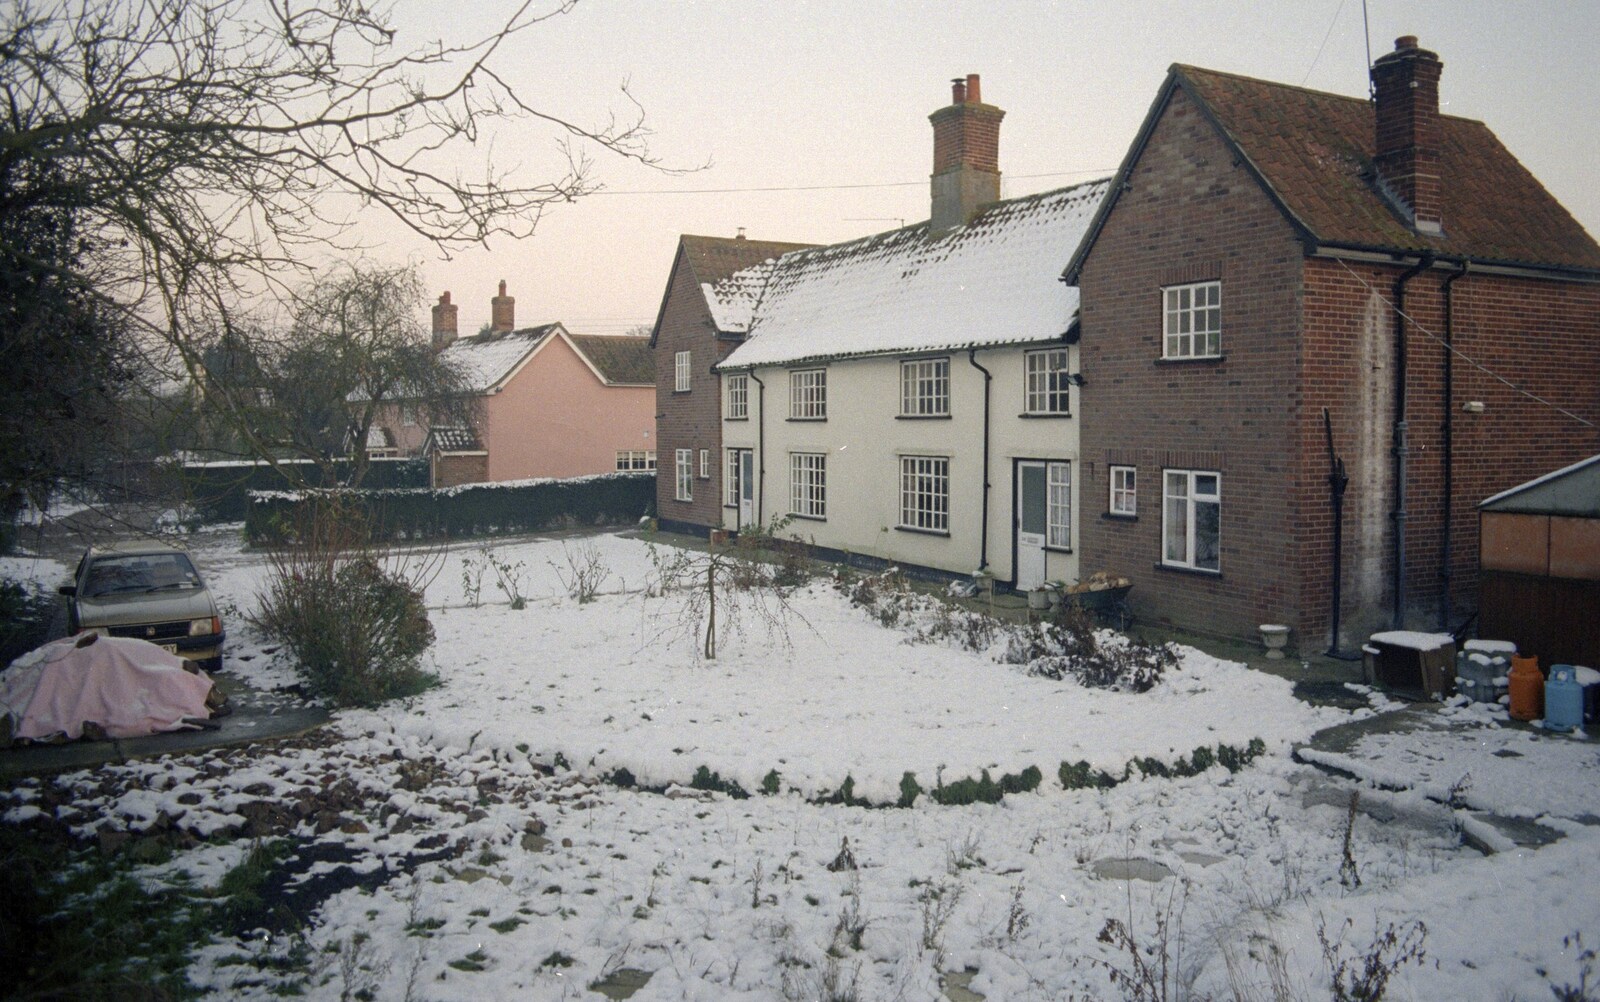 Nosher's pad in the snow from The CISU Internet Team, Bedroom Building and Ferries, Suffolk - 16th February 1996